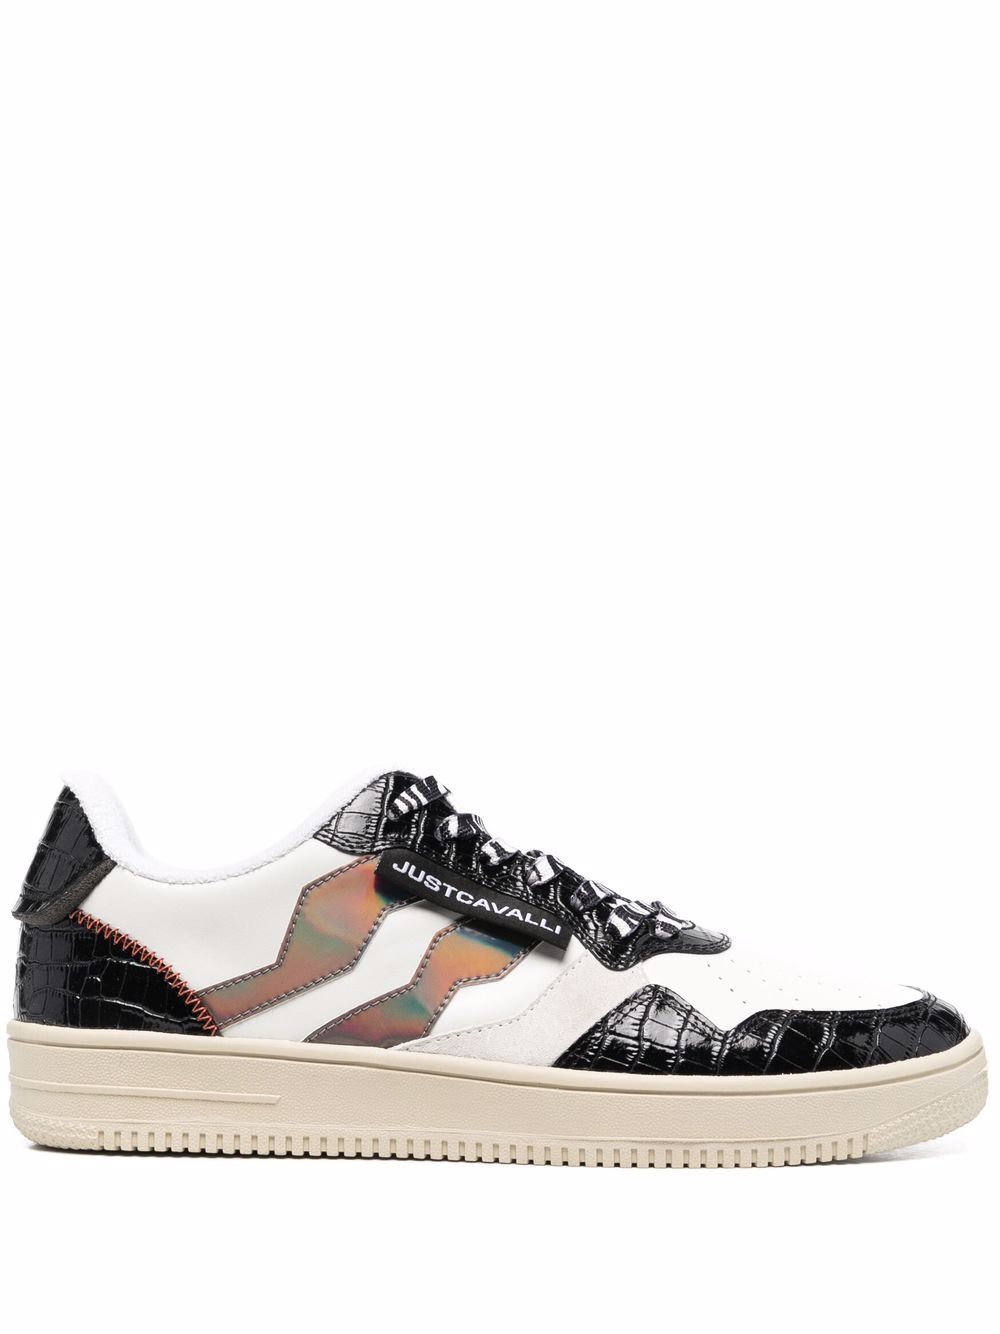 Just Cavalli Panelled lace-up Trainers - Farfetch